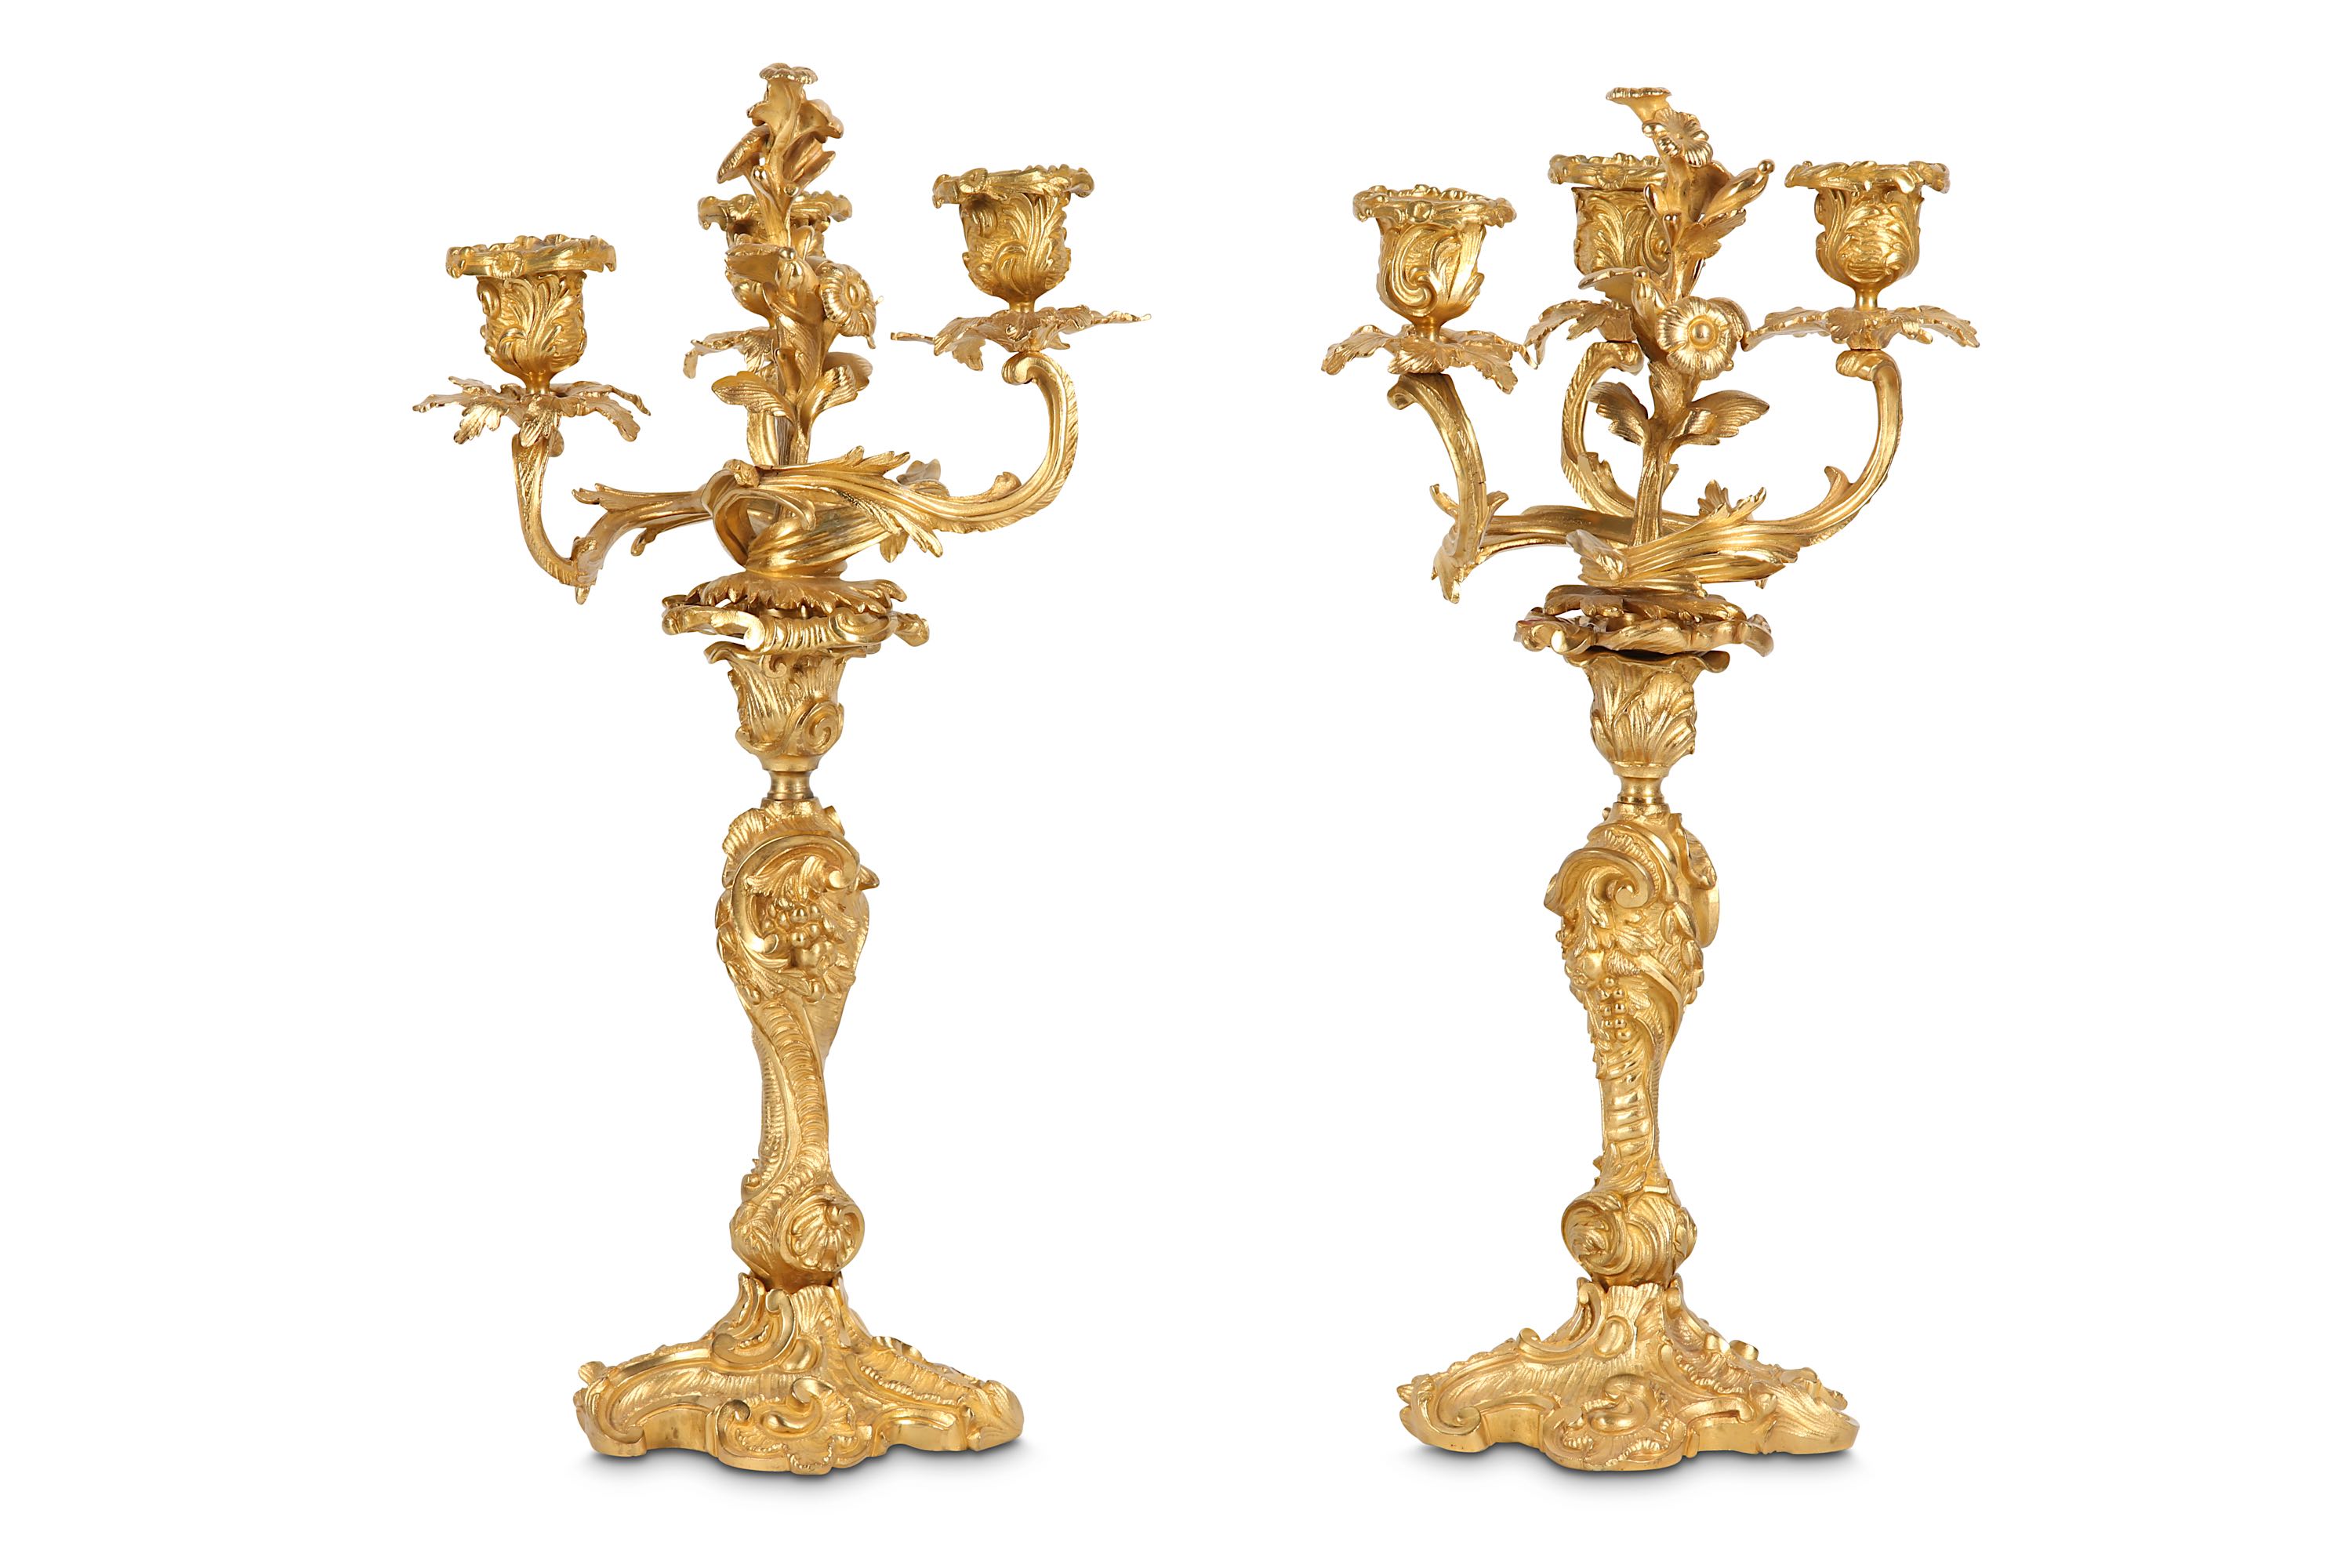 A PAIR OF LATE 19TH CENTURY FRENCH GILT BRONZE CAN